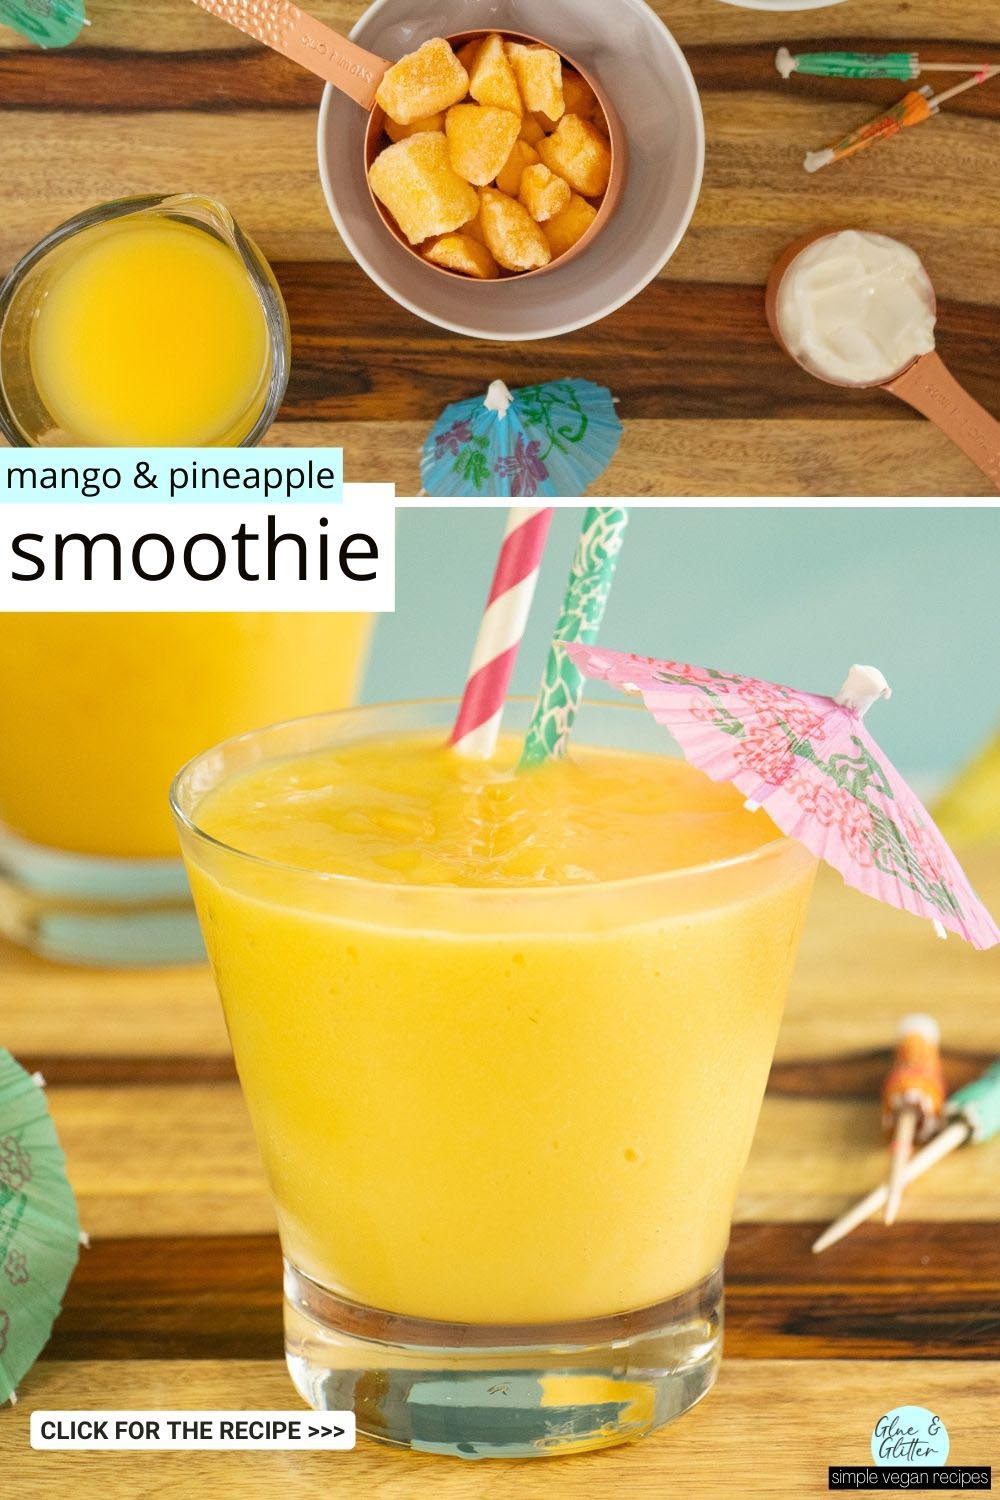 image collage showing mango pineapple smoothie ingredients and the finished smoothie in a glass with an umbrella and straws, text overlay